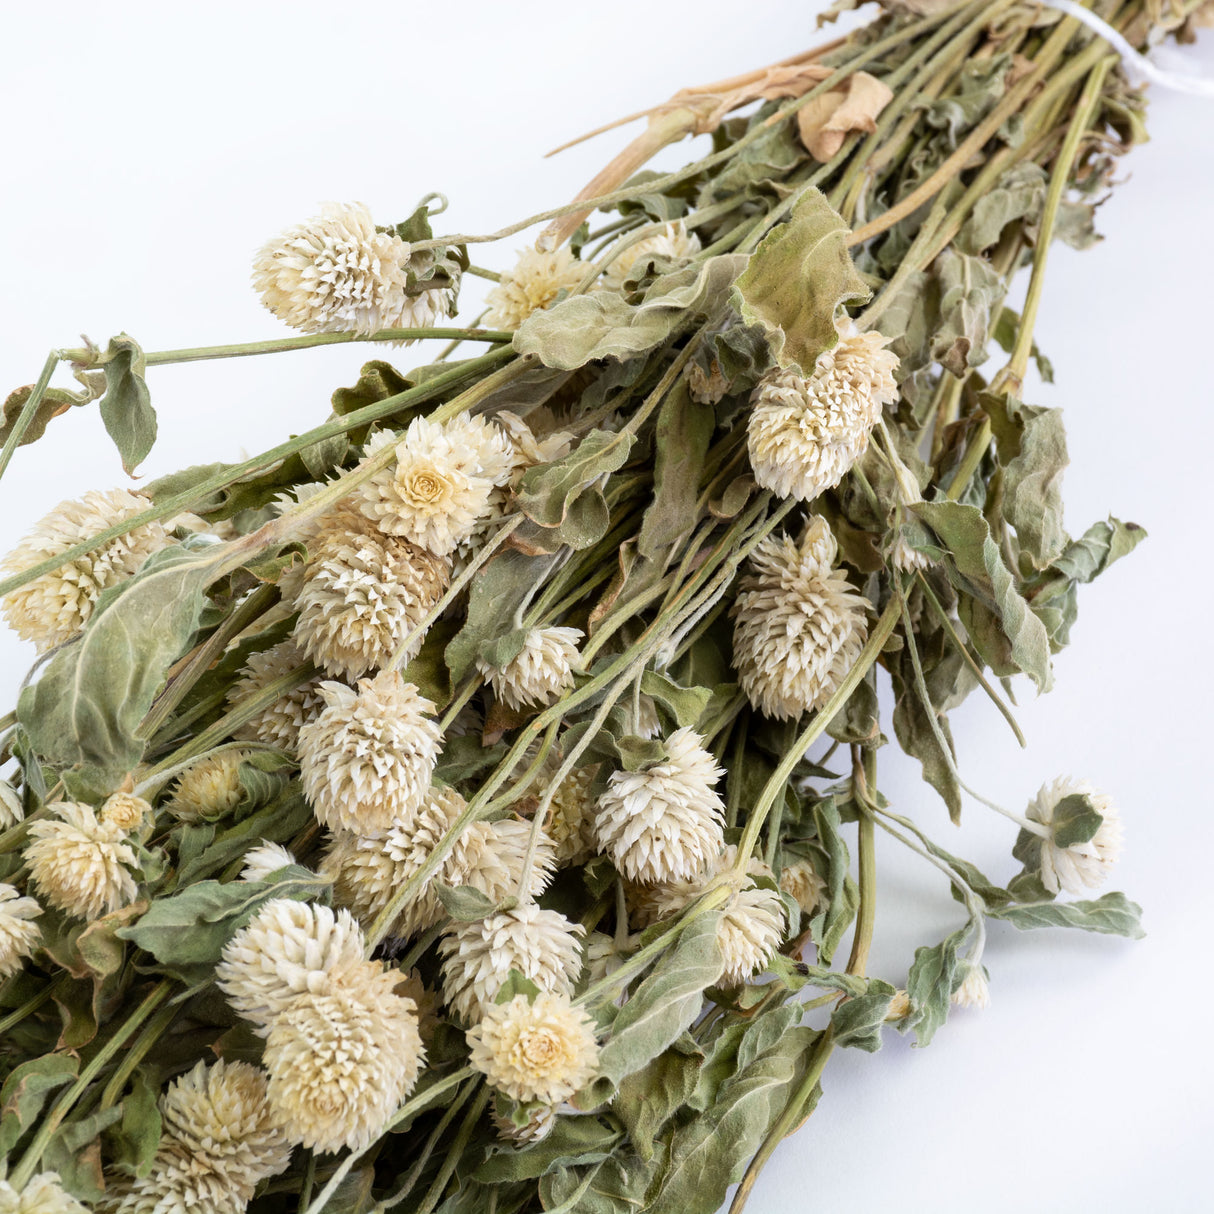 This image shows a bunch of dried gomphrena in their natural, creamy white colour, against a white background